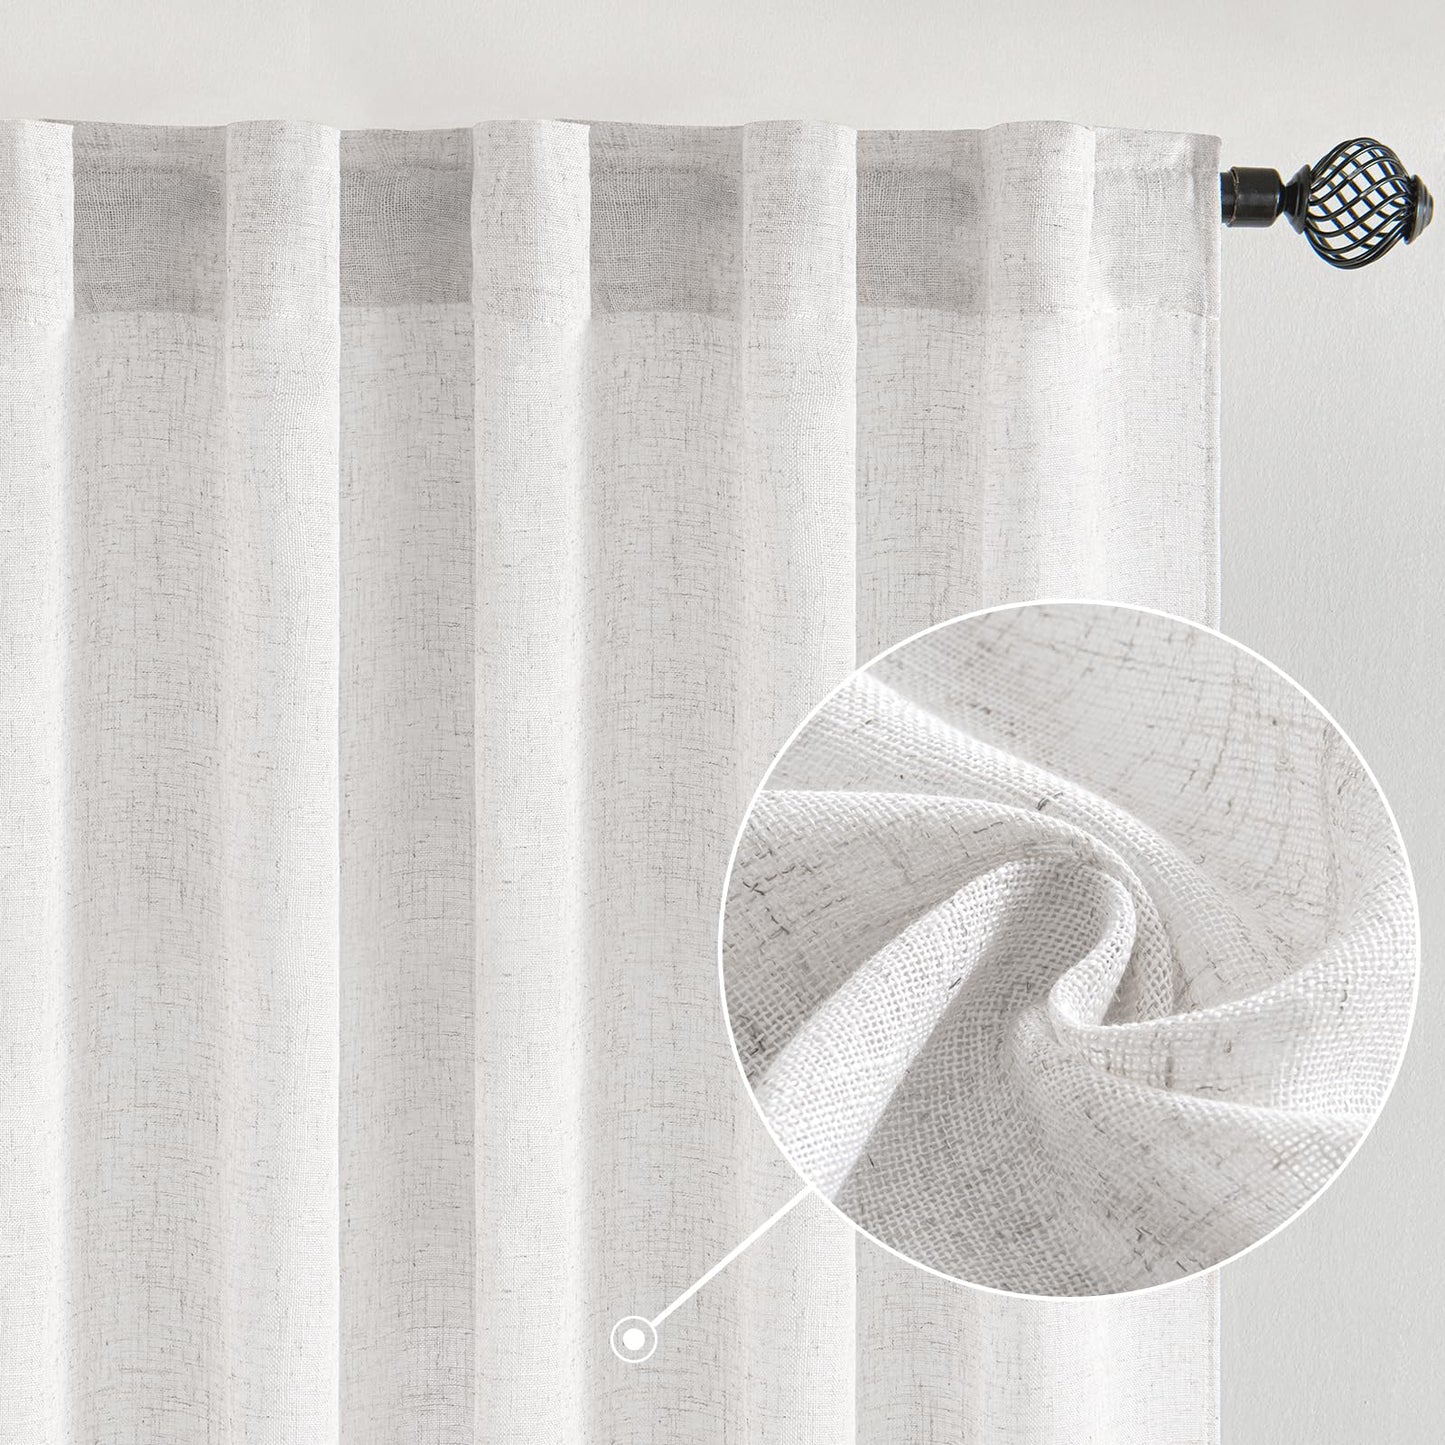 MIULEE White Linen Curtains 84 Inch Length for Bedroom Living Room, Soft Thick Linen Textured Window Drapes Semi Sheer Light Filtering Rod Pocket Back Tab Burlap Look Farmhouse Decor, 2 Panels